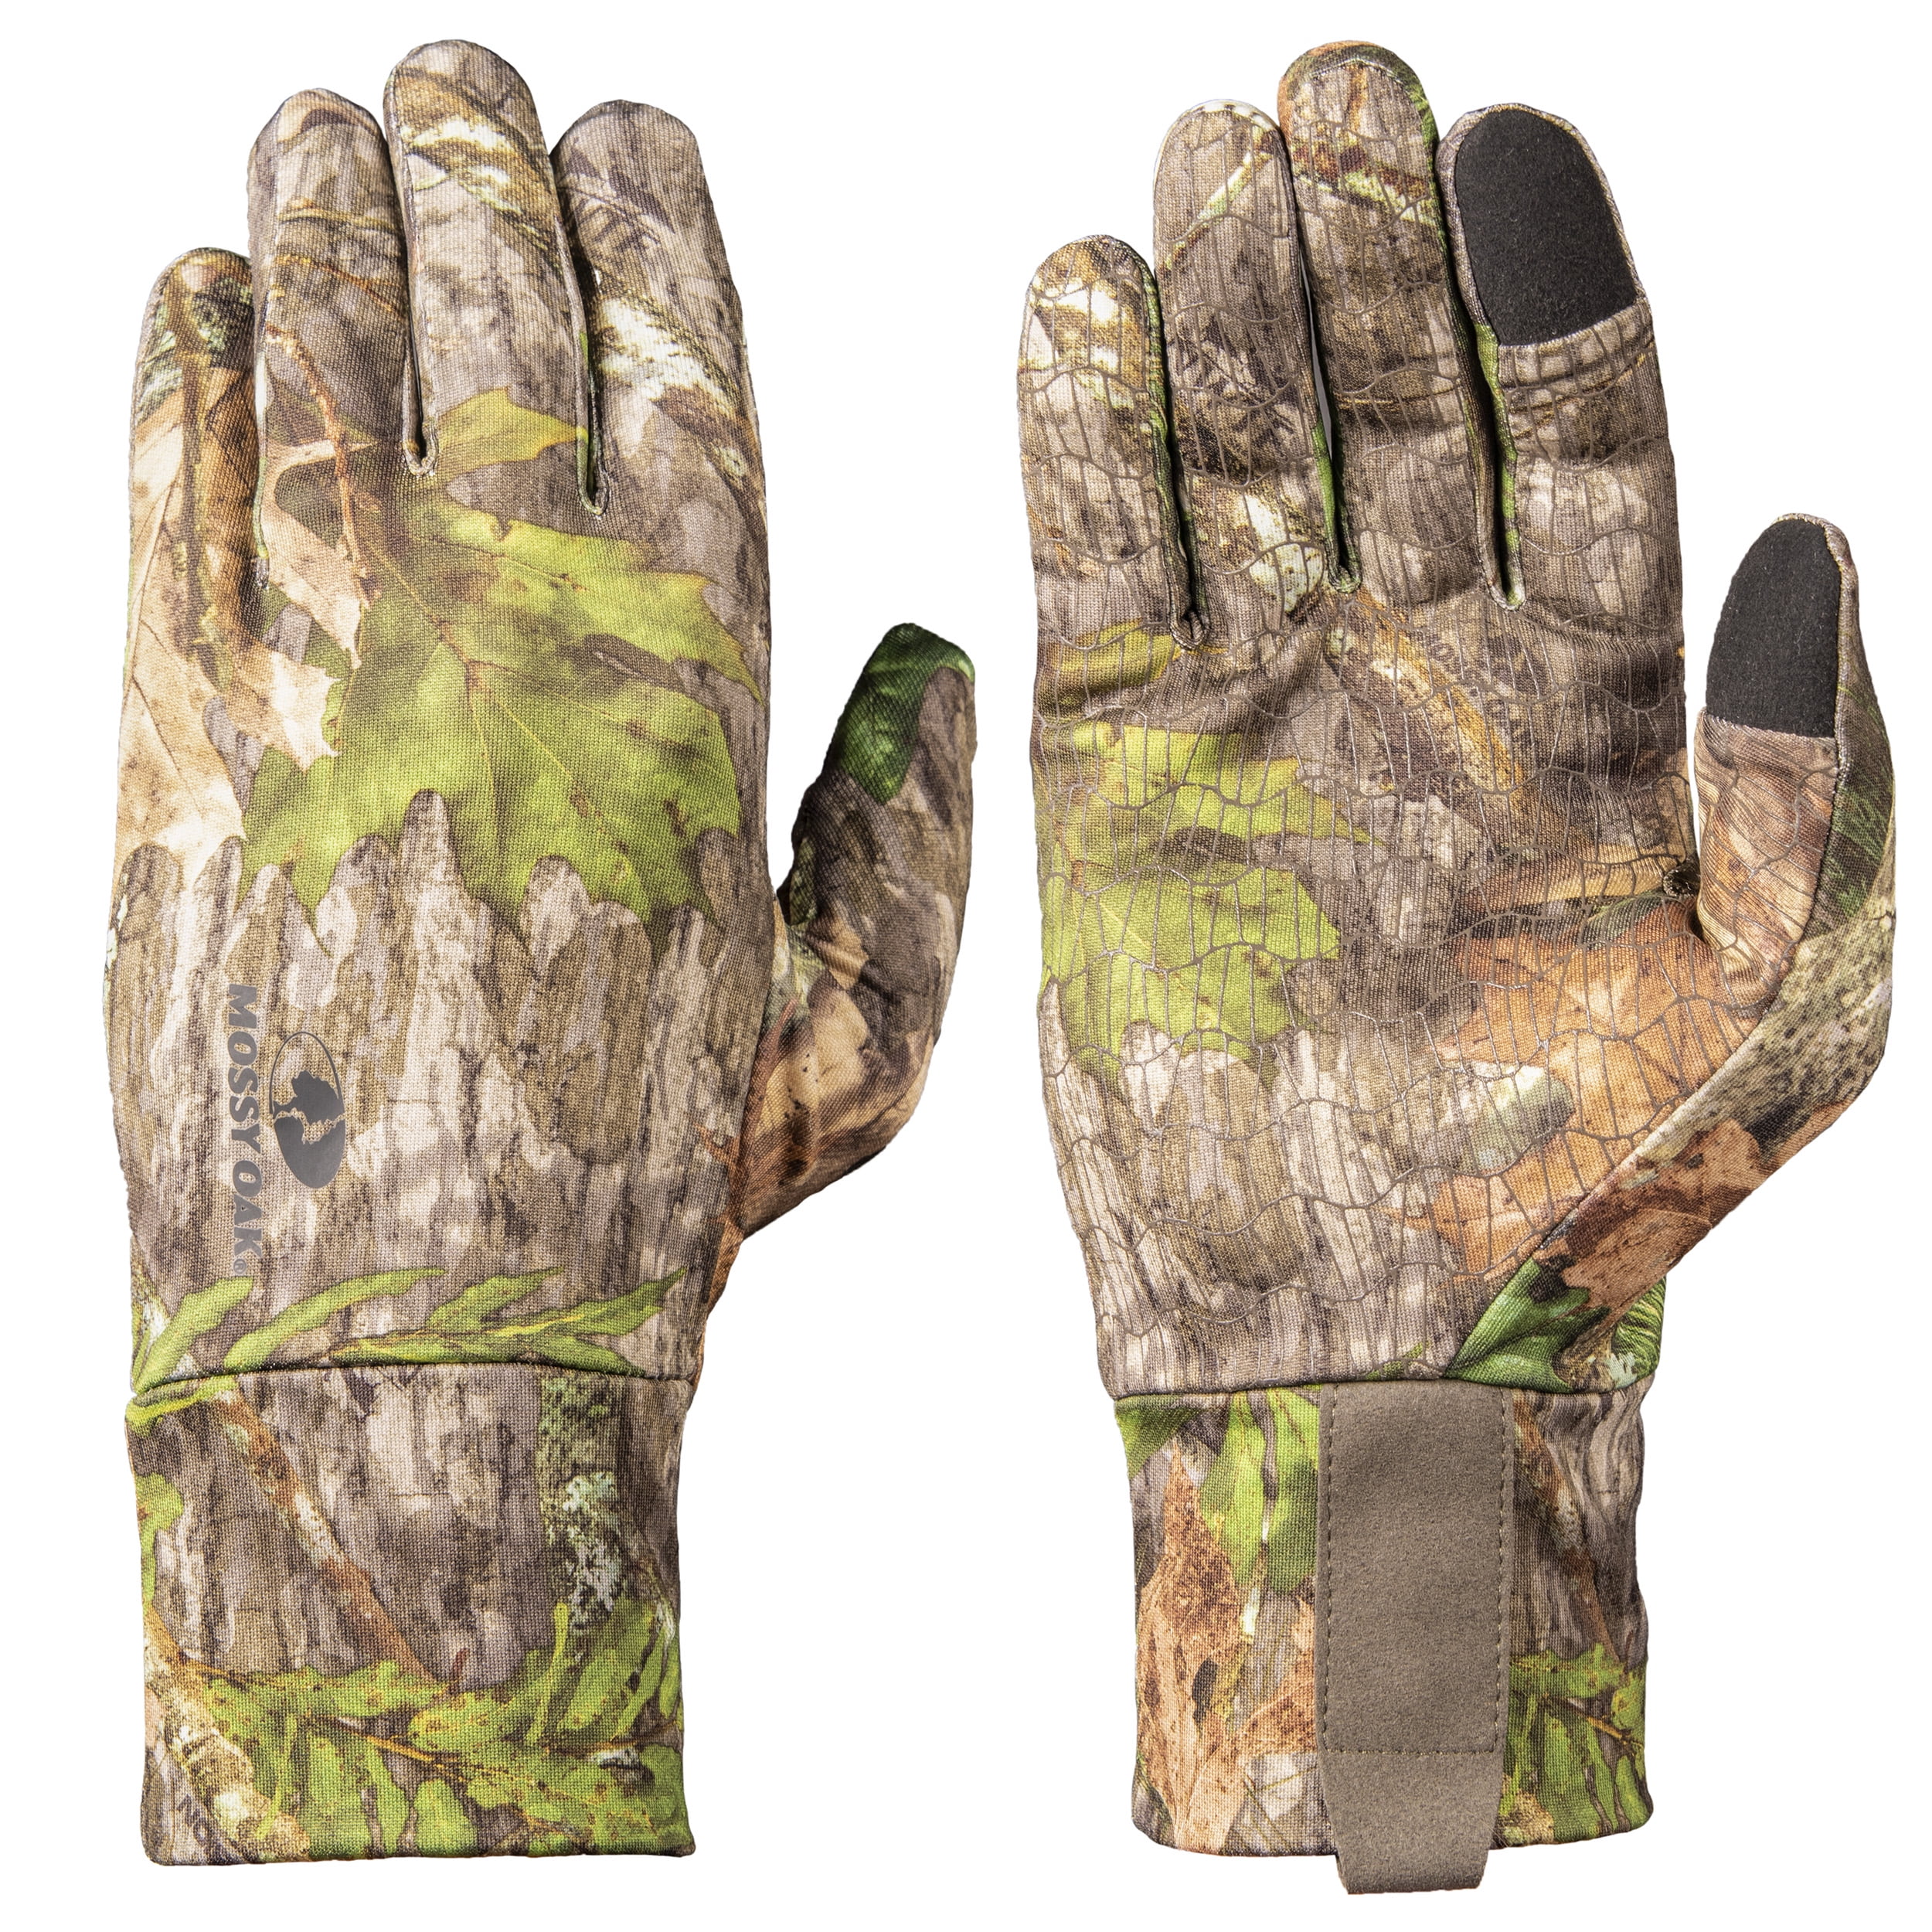 Mossy Oak Obsession NWTF Edition Men's Lightweight Gloves - L-XL Each